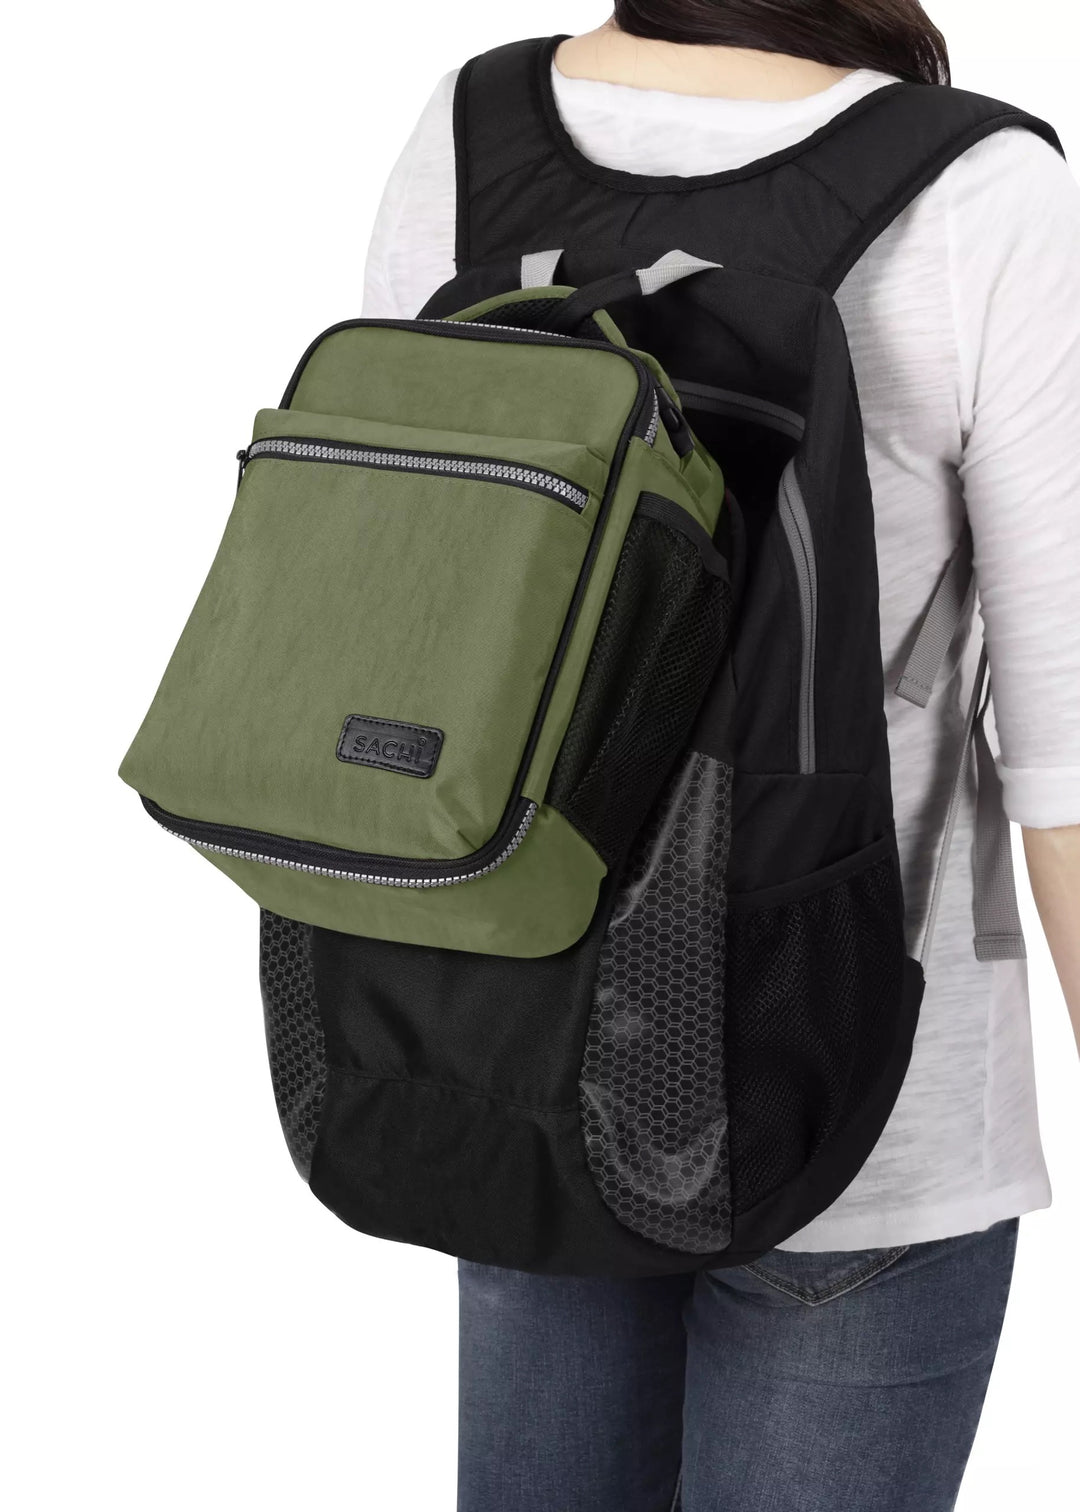 Sachi Explorer Insulated Lunch Bag Olive